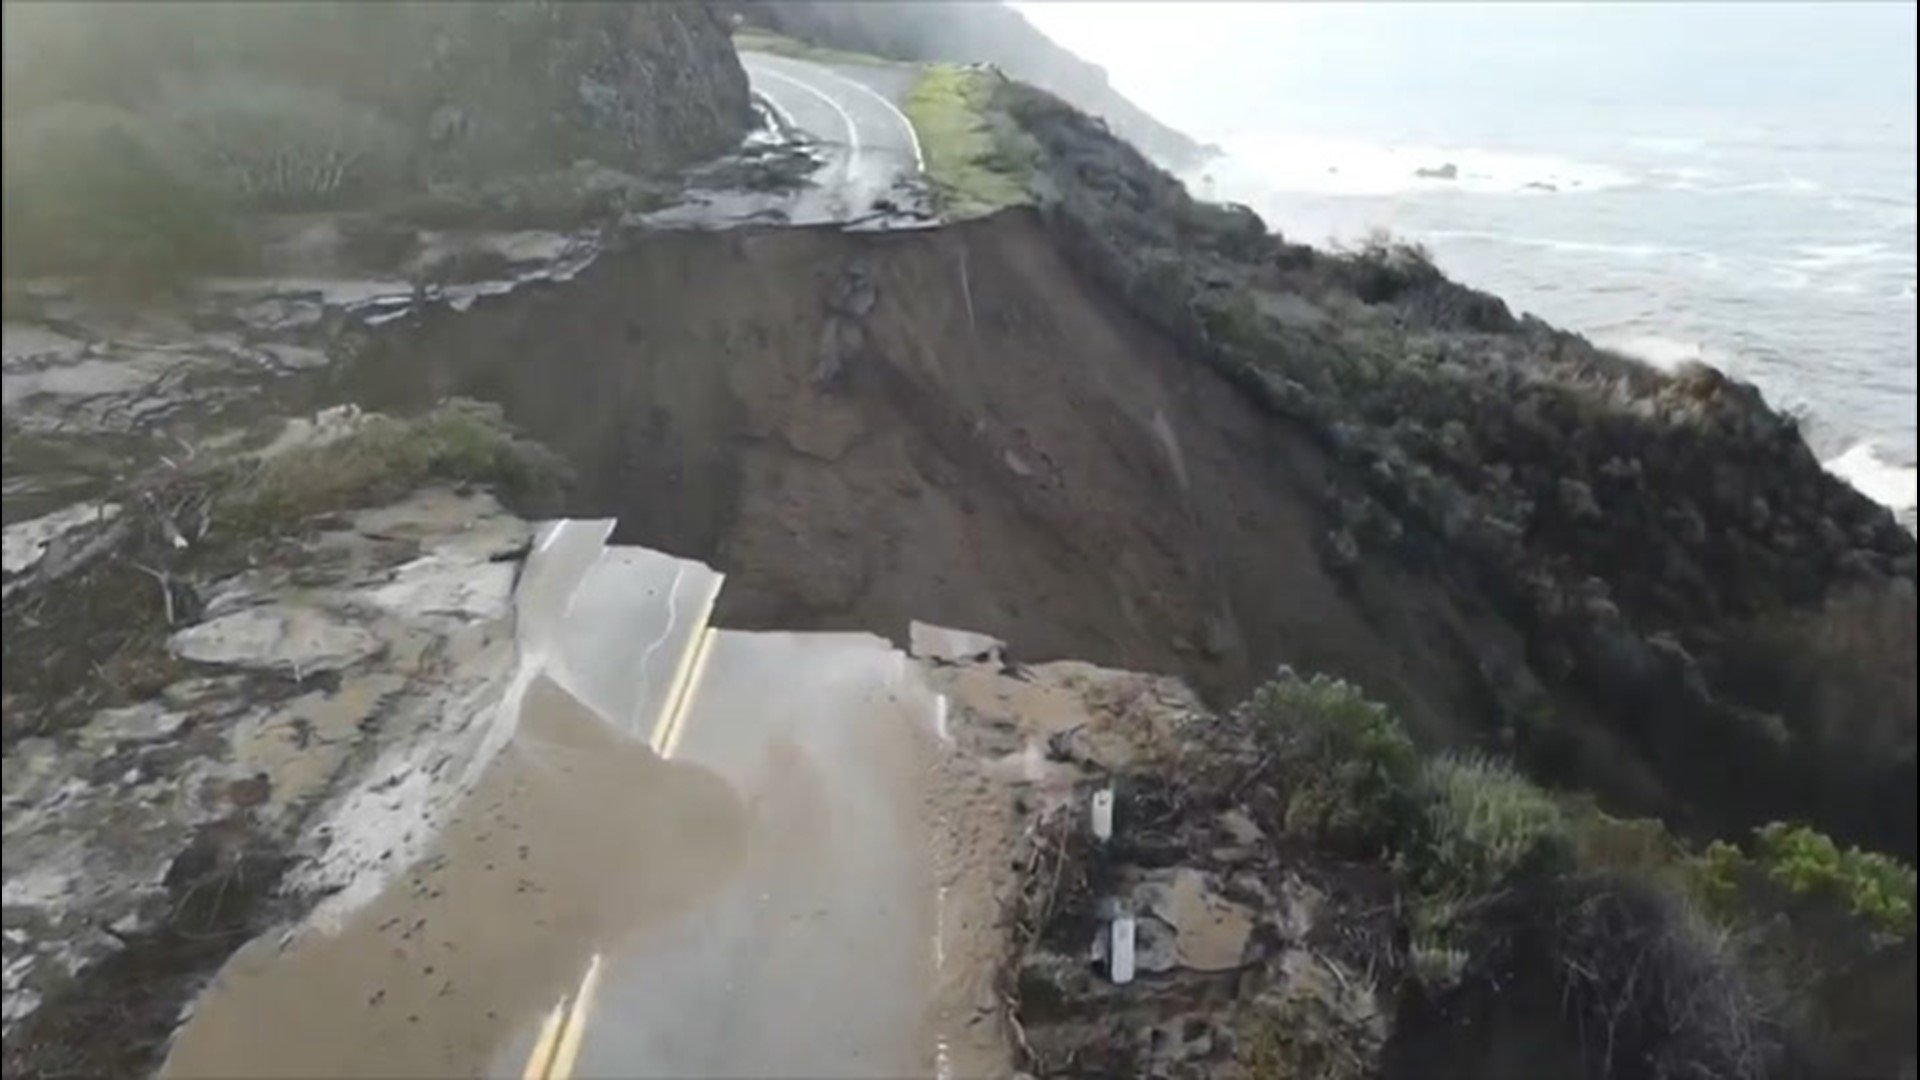 A debris flow washed away a section of Highway 1 in Big Sur, California, on Jan. 29. Flooding the day before caused the road to begin crumbling.